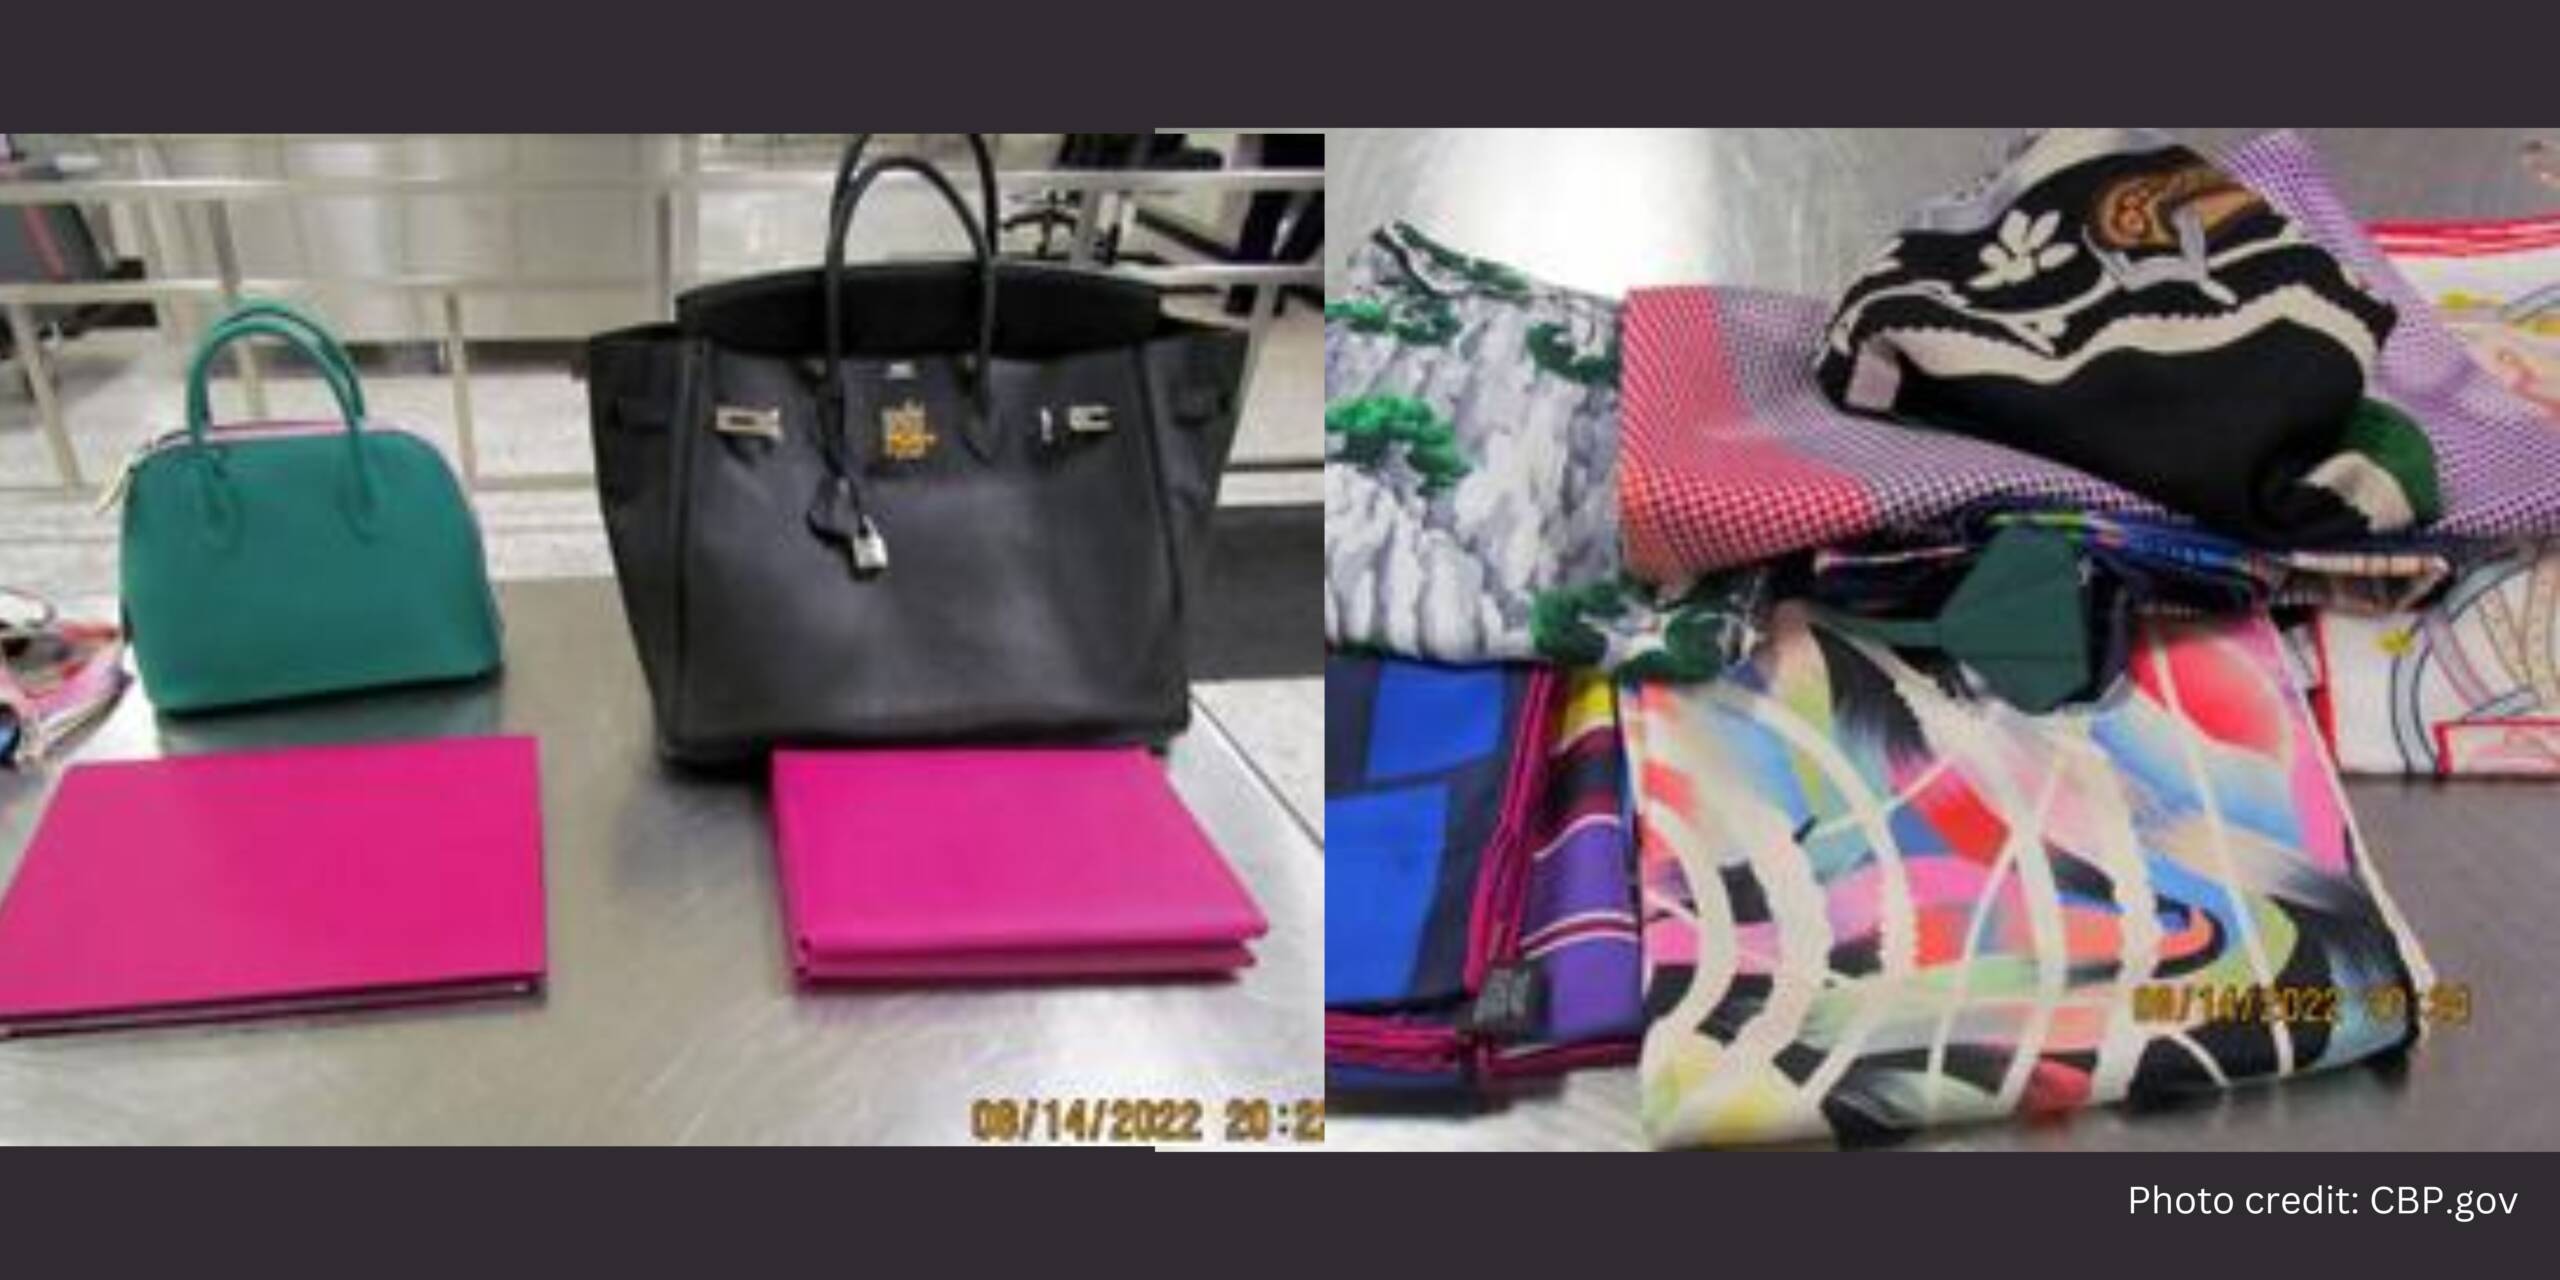 American couple charged $30,000 for failing to delcare their luxury purchases including Hermes and Chanel